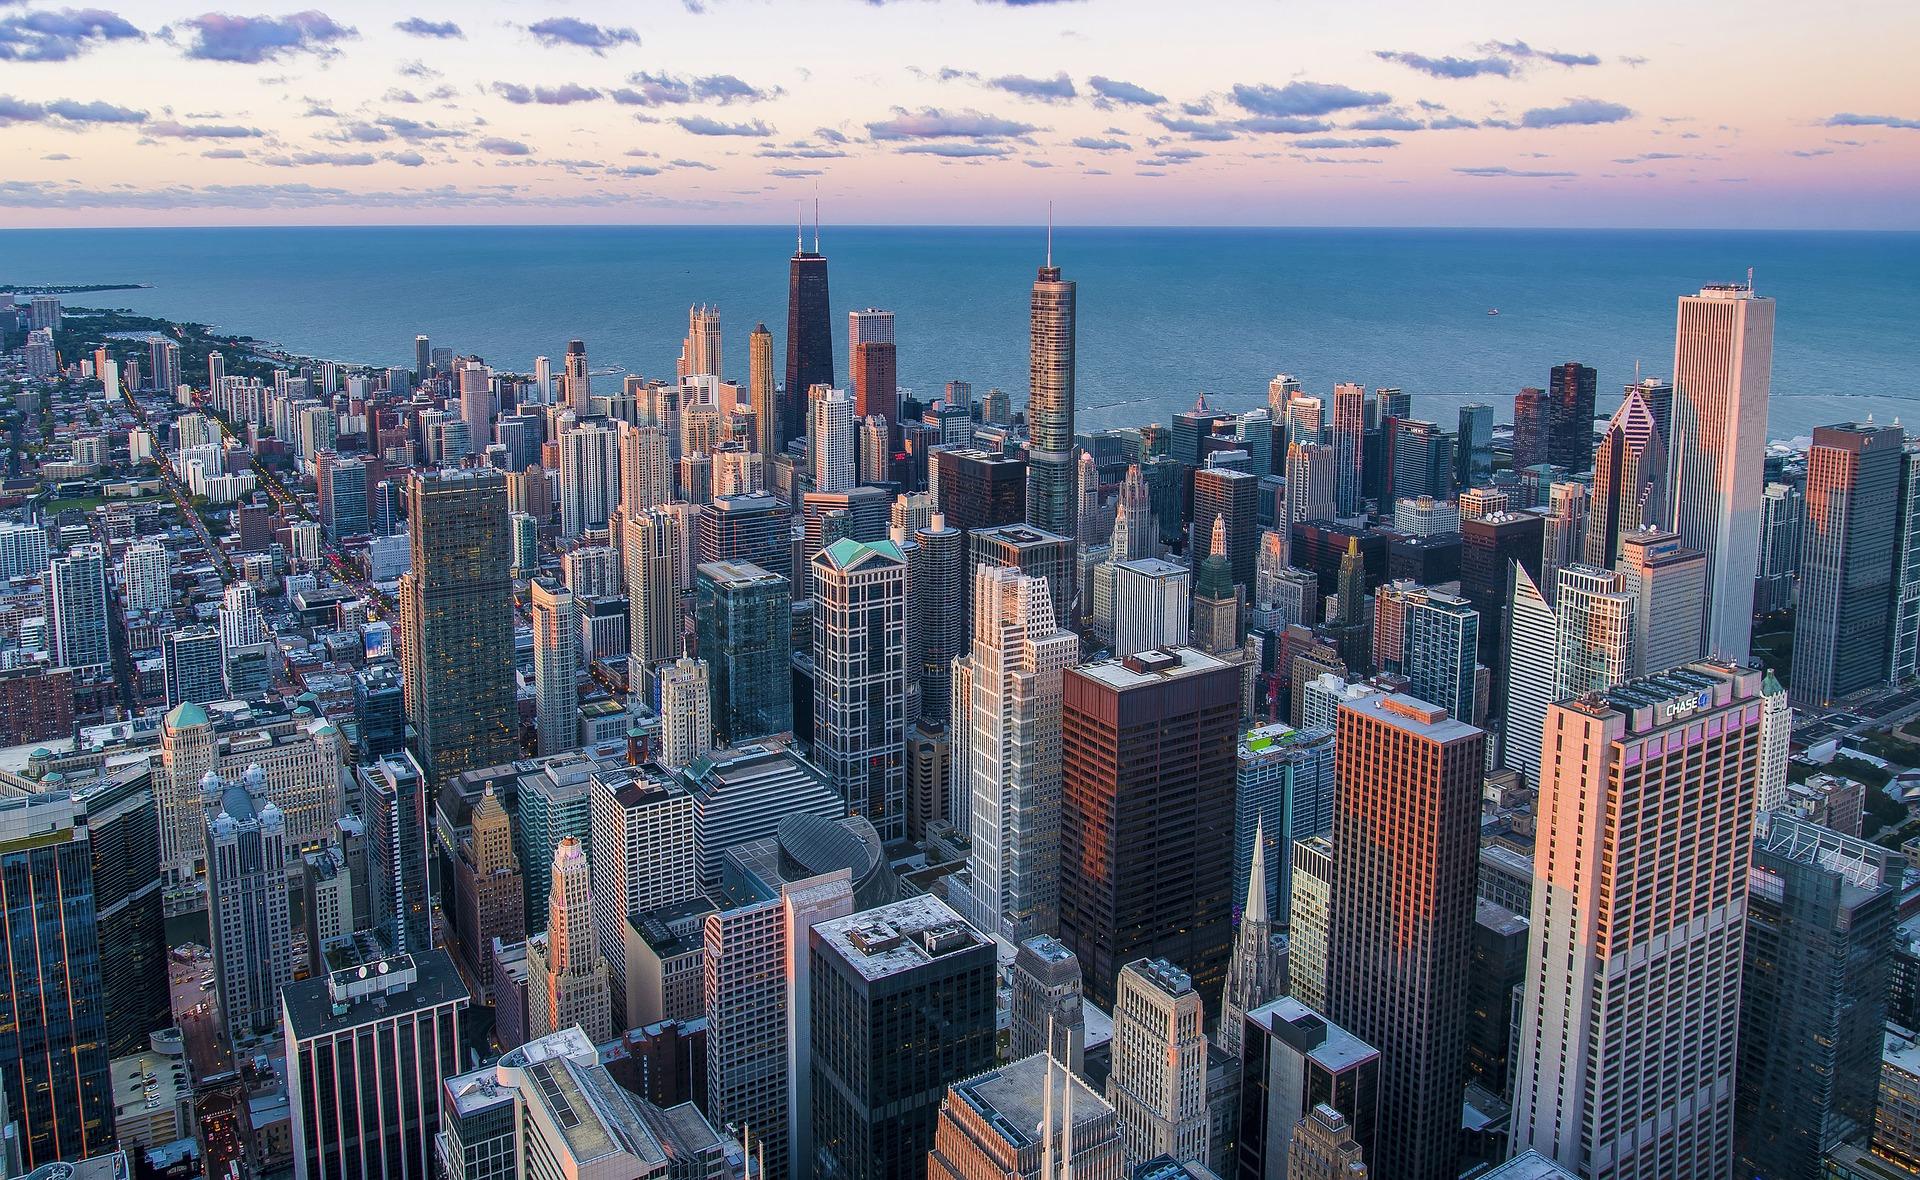 Security Courses and Network Events, Chicago, 20-21 Feb. 2020